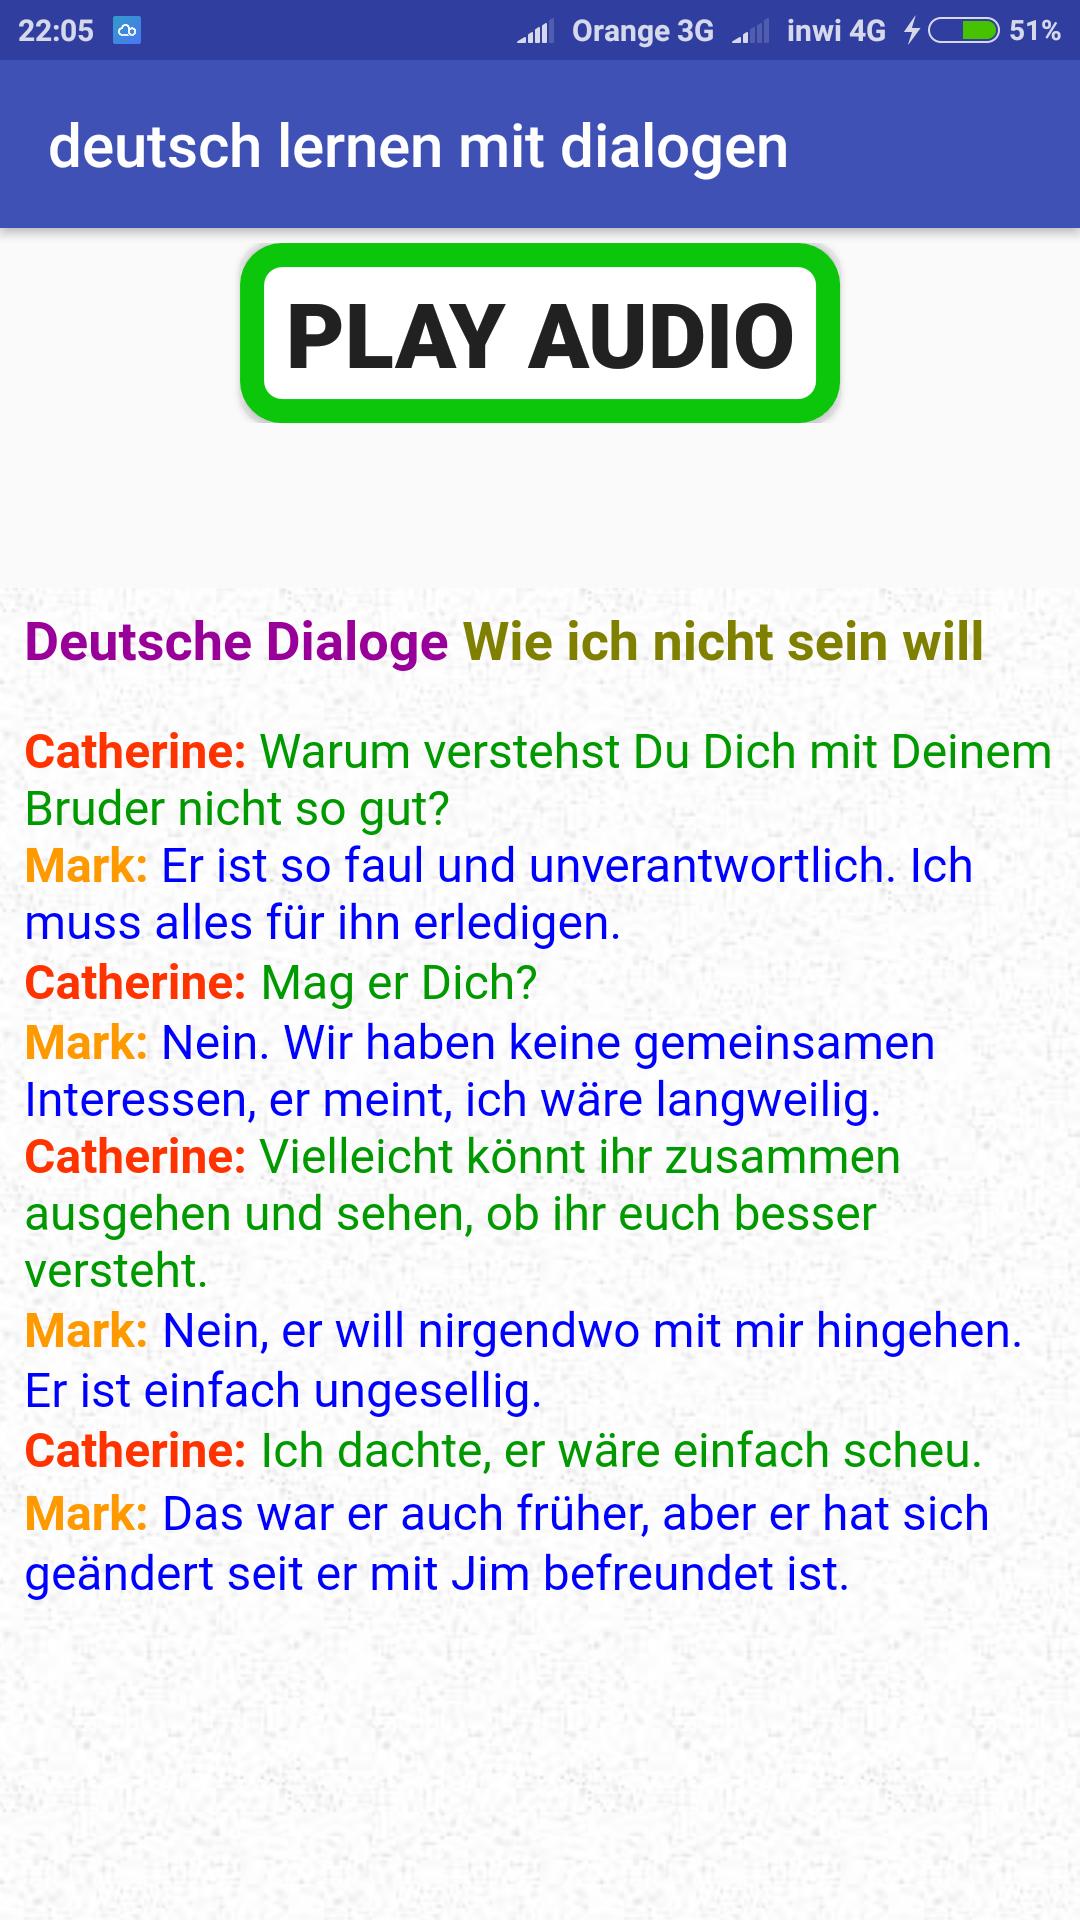 german to french With dialogues A1 A2 B1 B2 for Android - APK Download